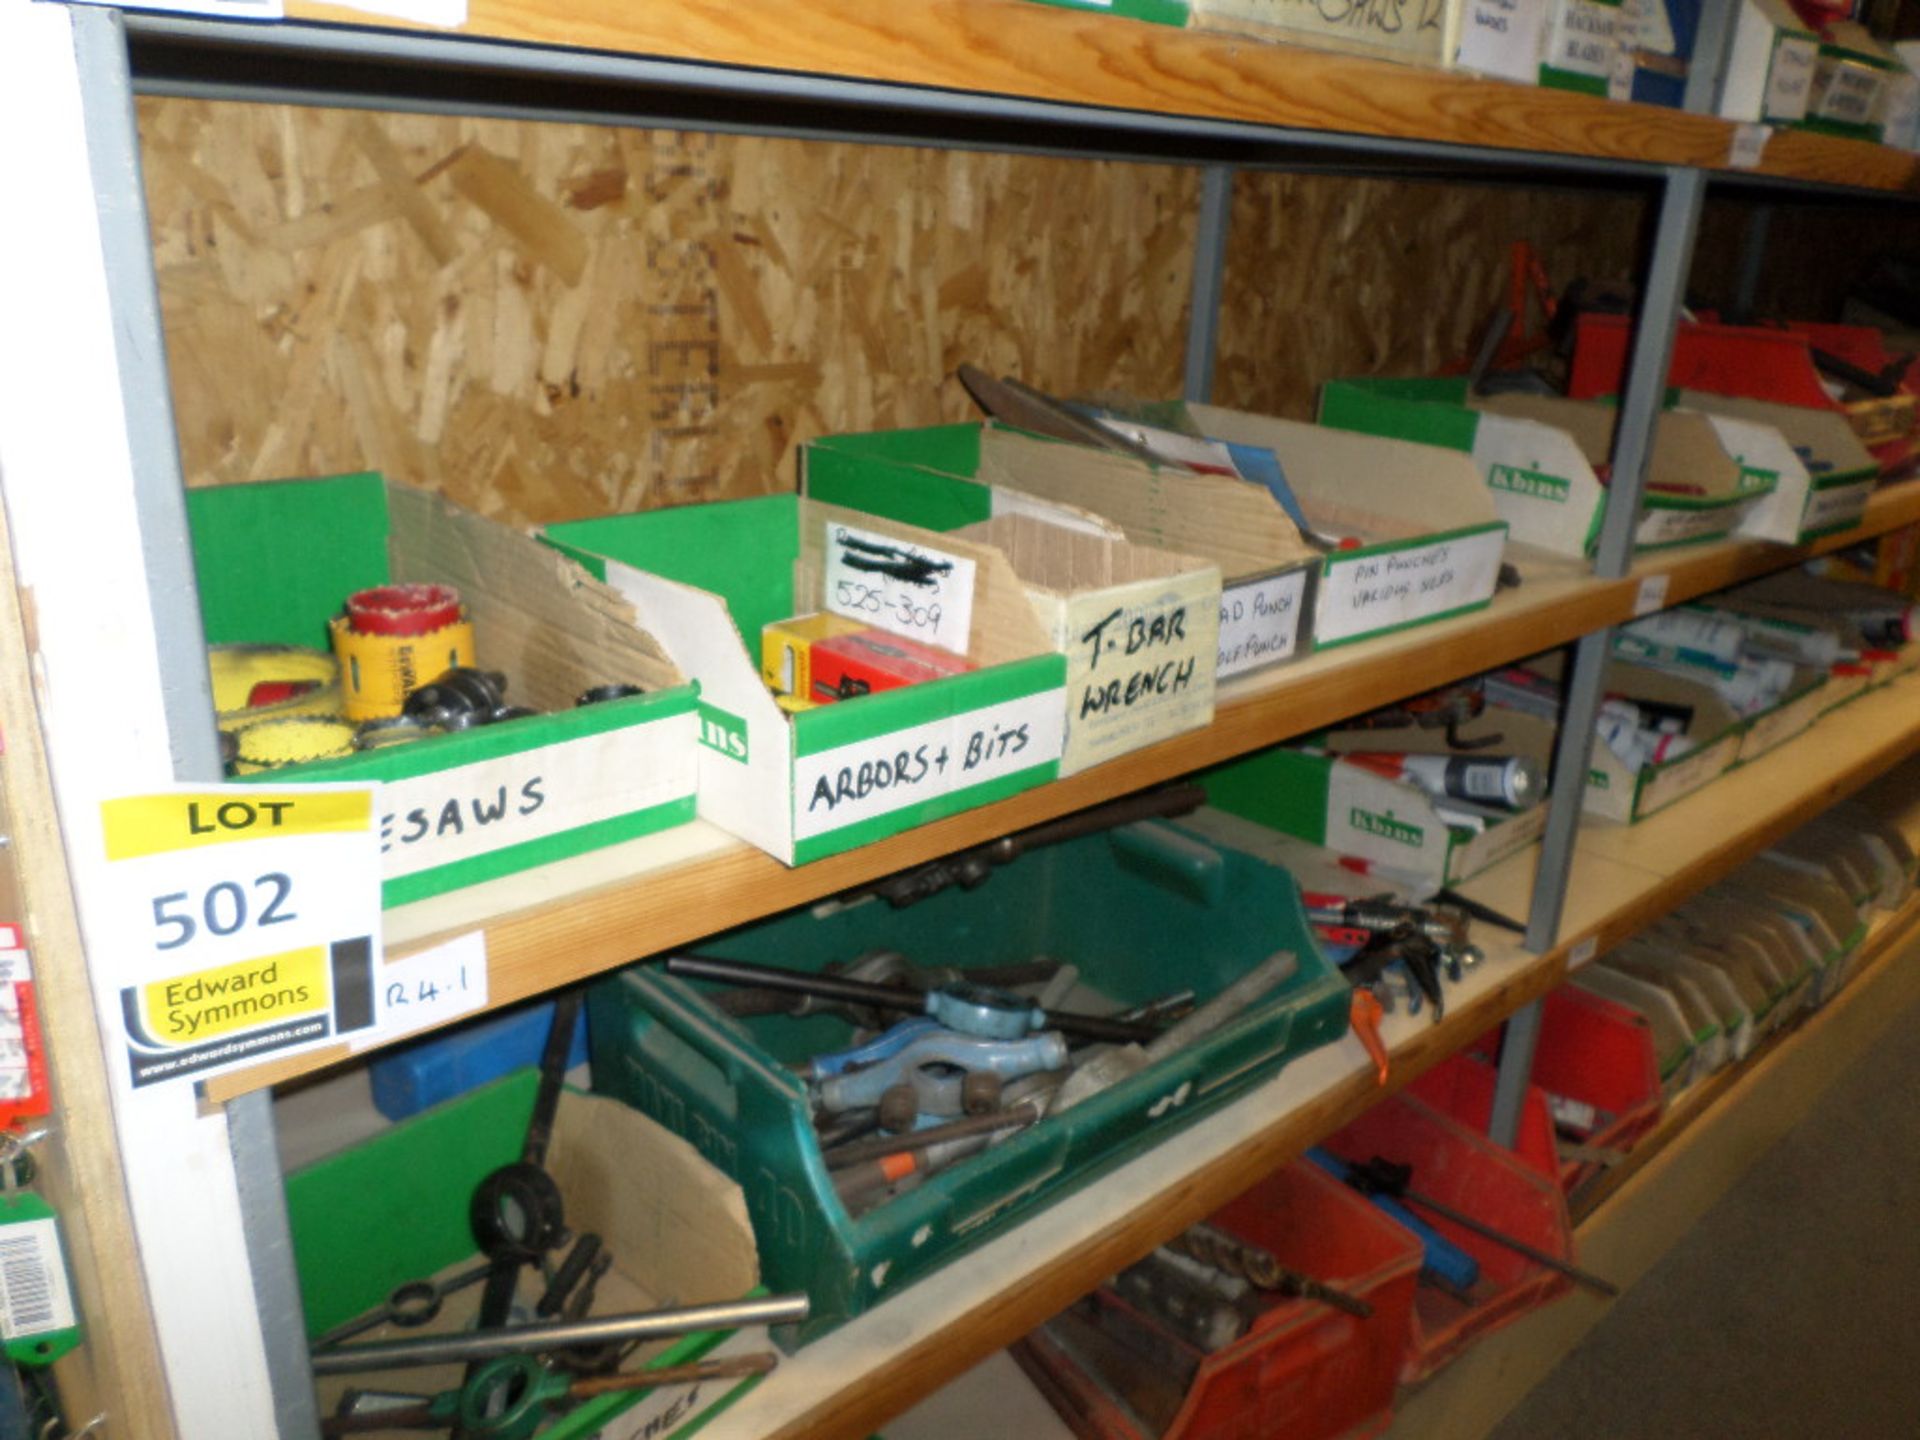 Contents to Rack D, tier DR4 mainly Pliers, Hole cutters, hole punches, hex keys, hammers, sockets